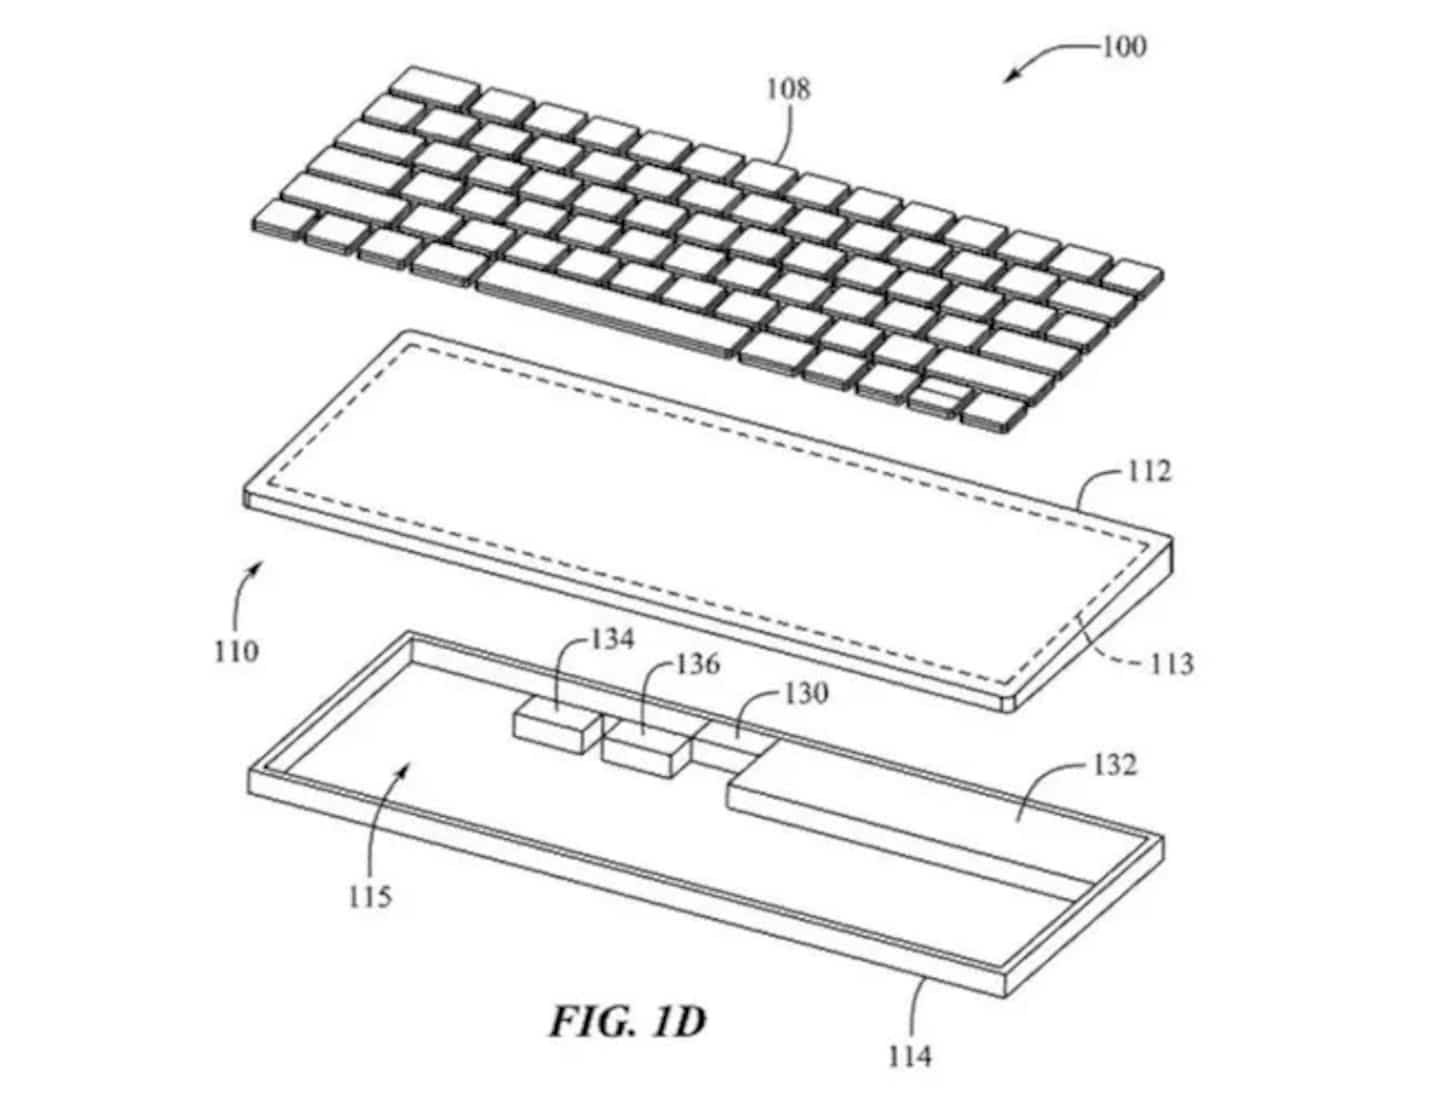 According to this patent, Apple would be concocting a keyboard integrating a macOS computer